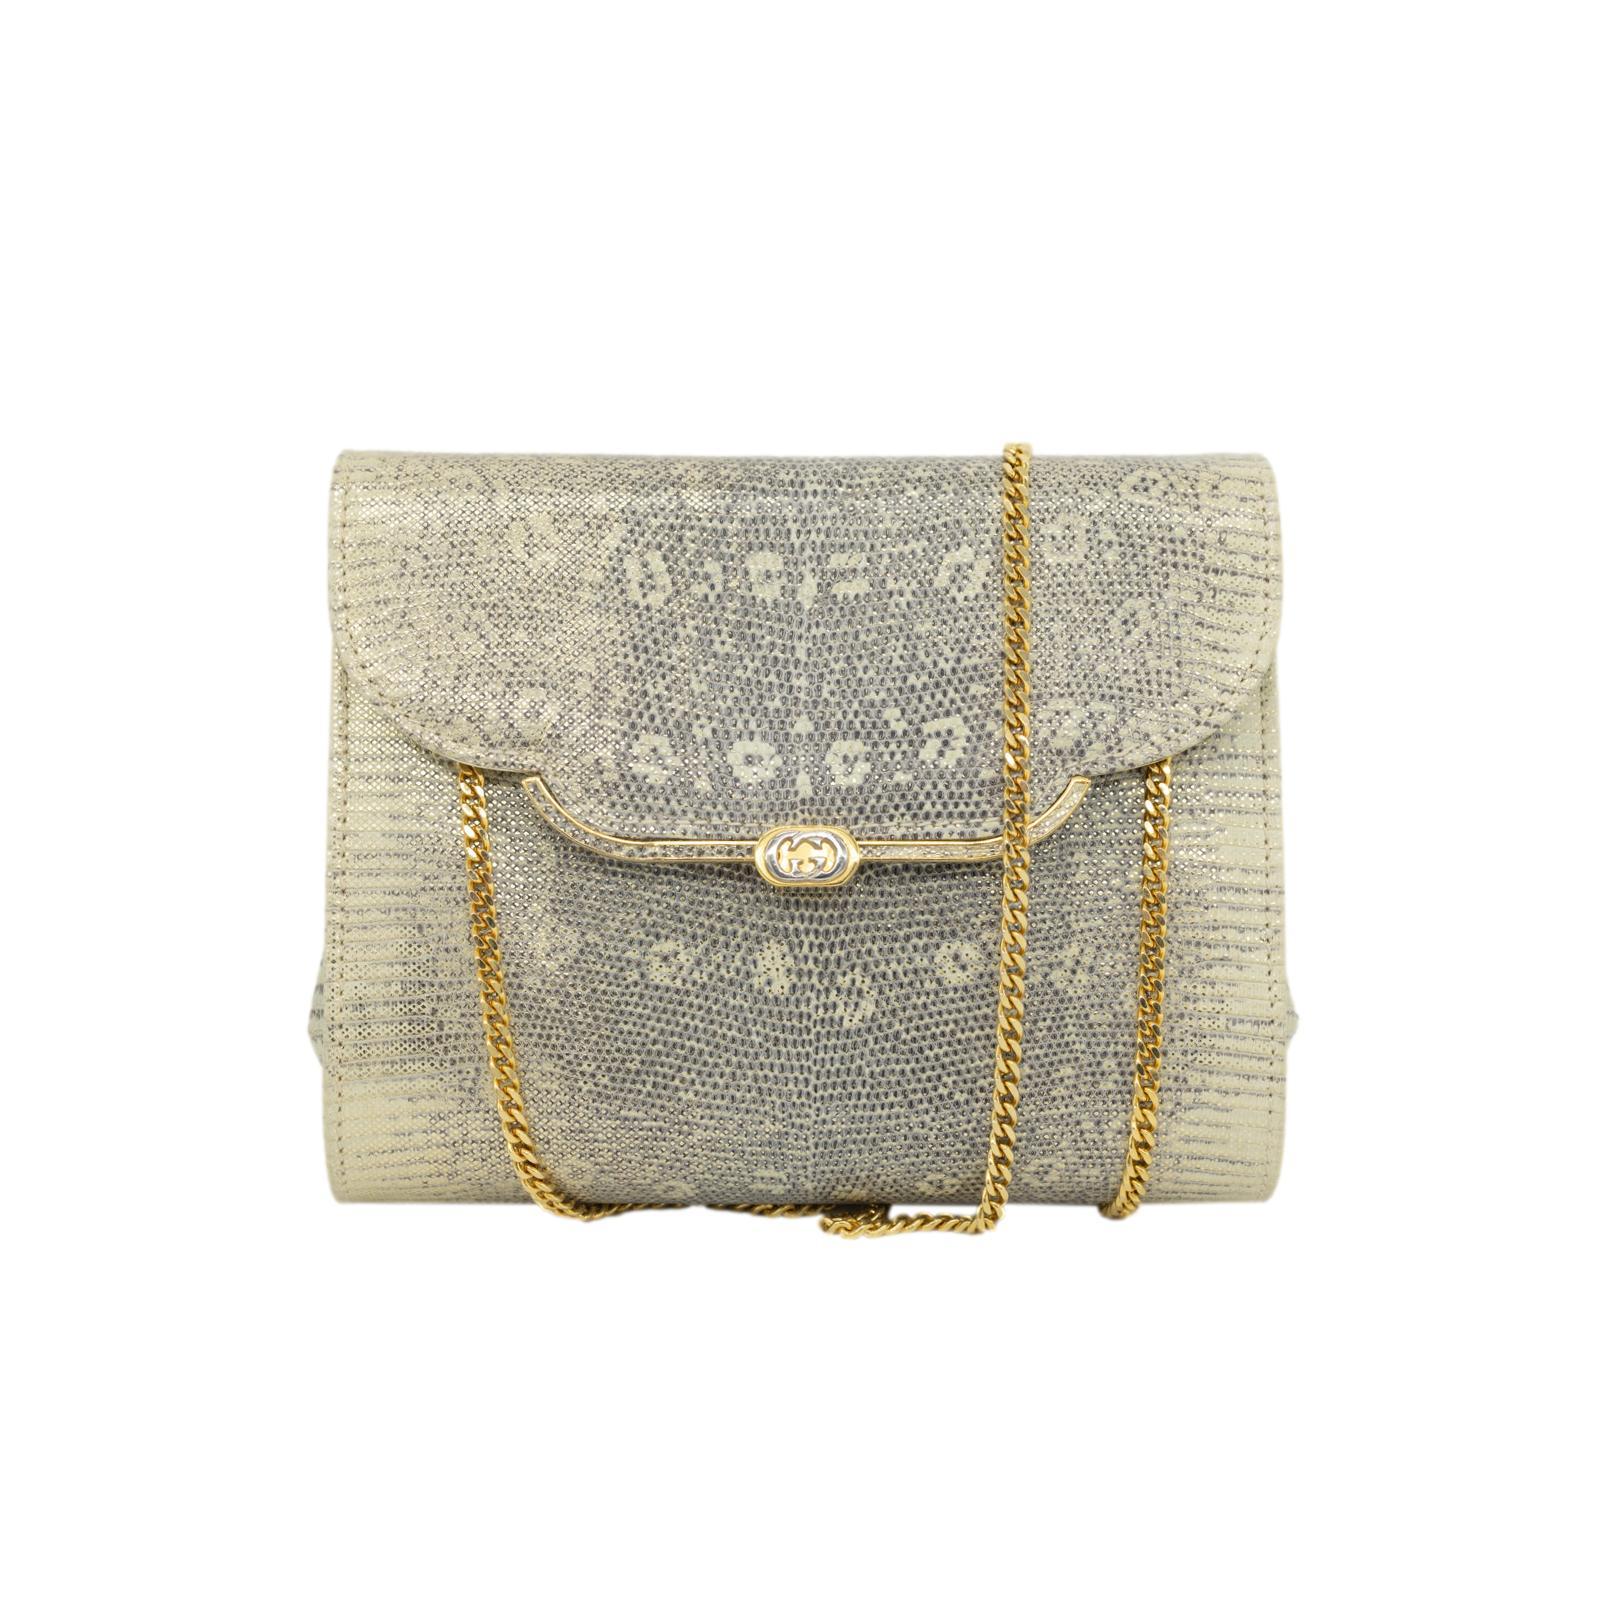 Gucci Vintage Metallic Monitor Lizard Leather Shoulder Clutch Evening Bag, 1970. This extremely rare and highly sought after vintage lizard bag is handcrafted from exotic and rare monitor lizard with an embossed metallic gold finish and lined with a